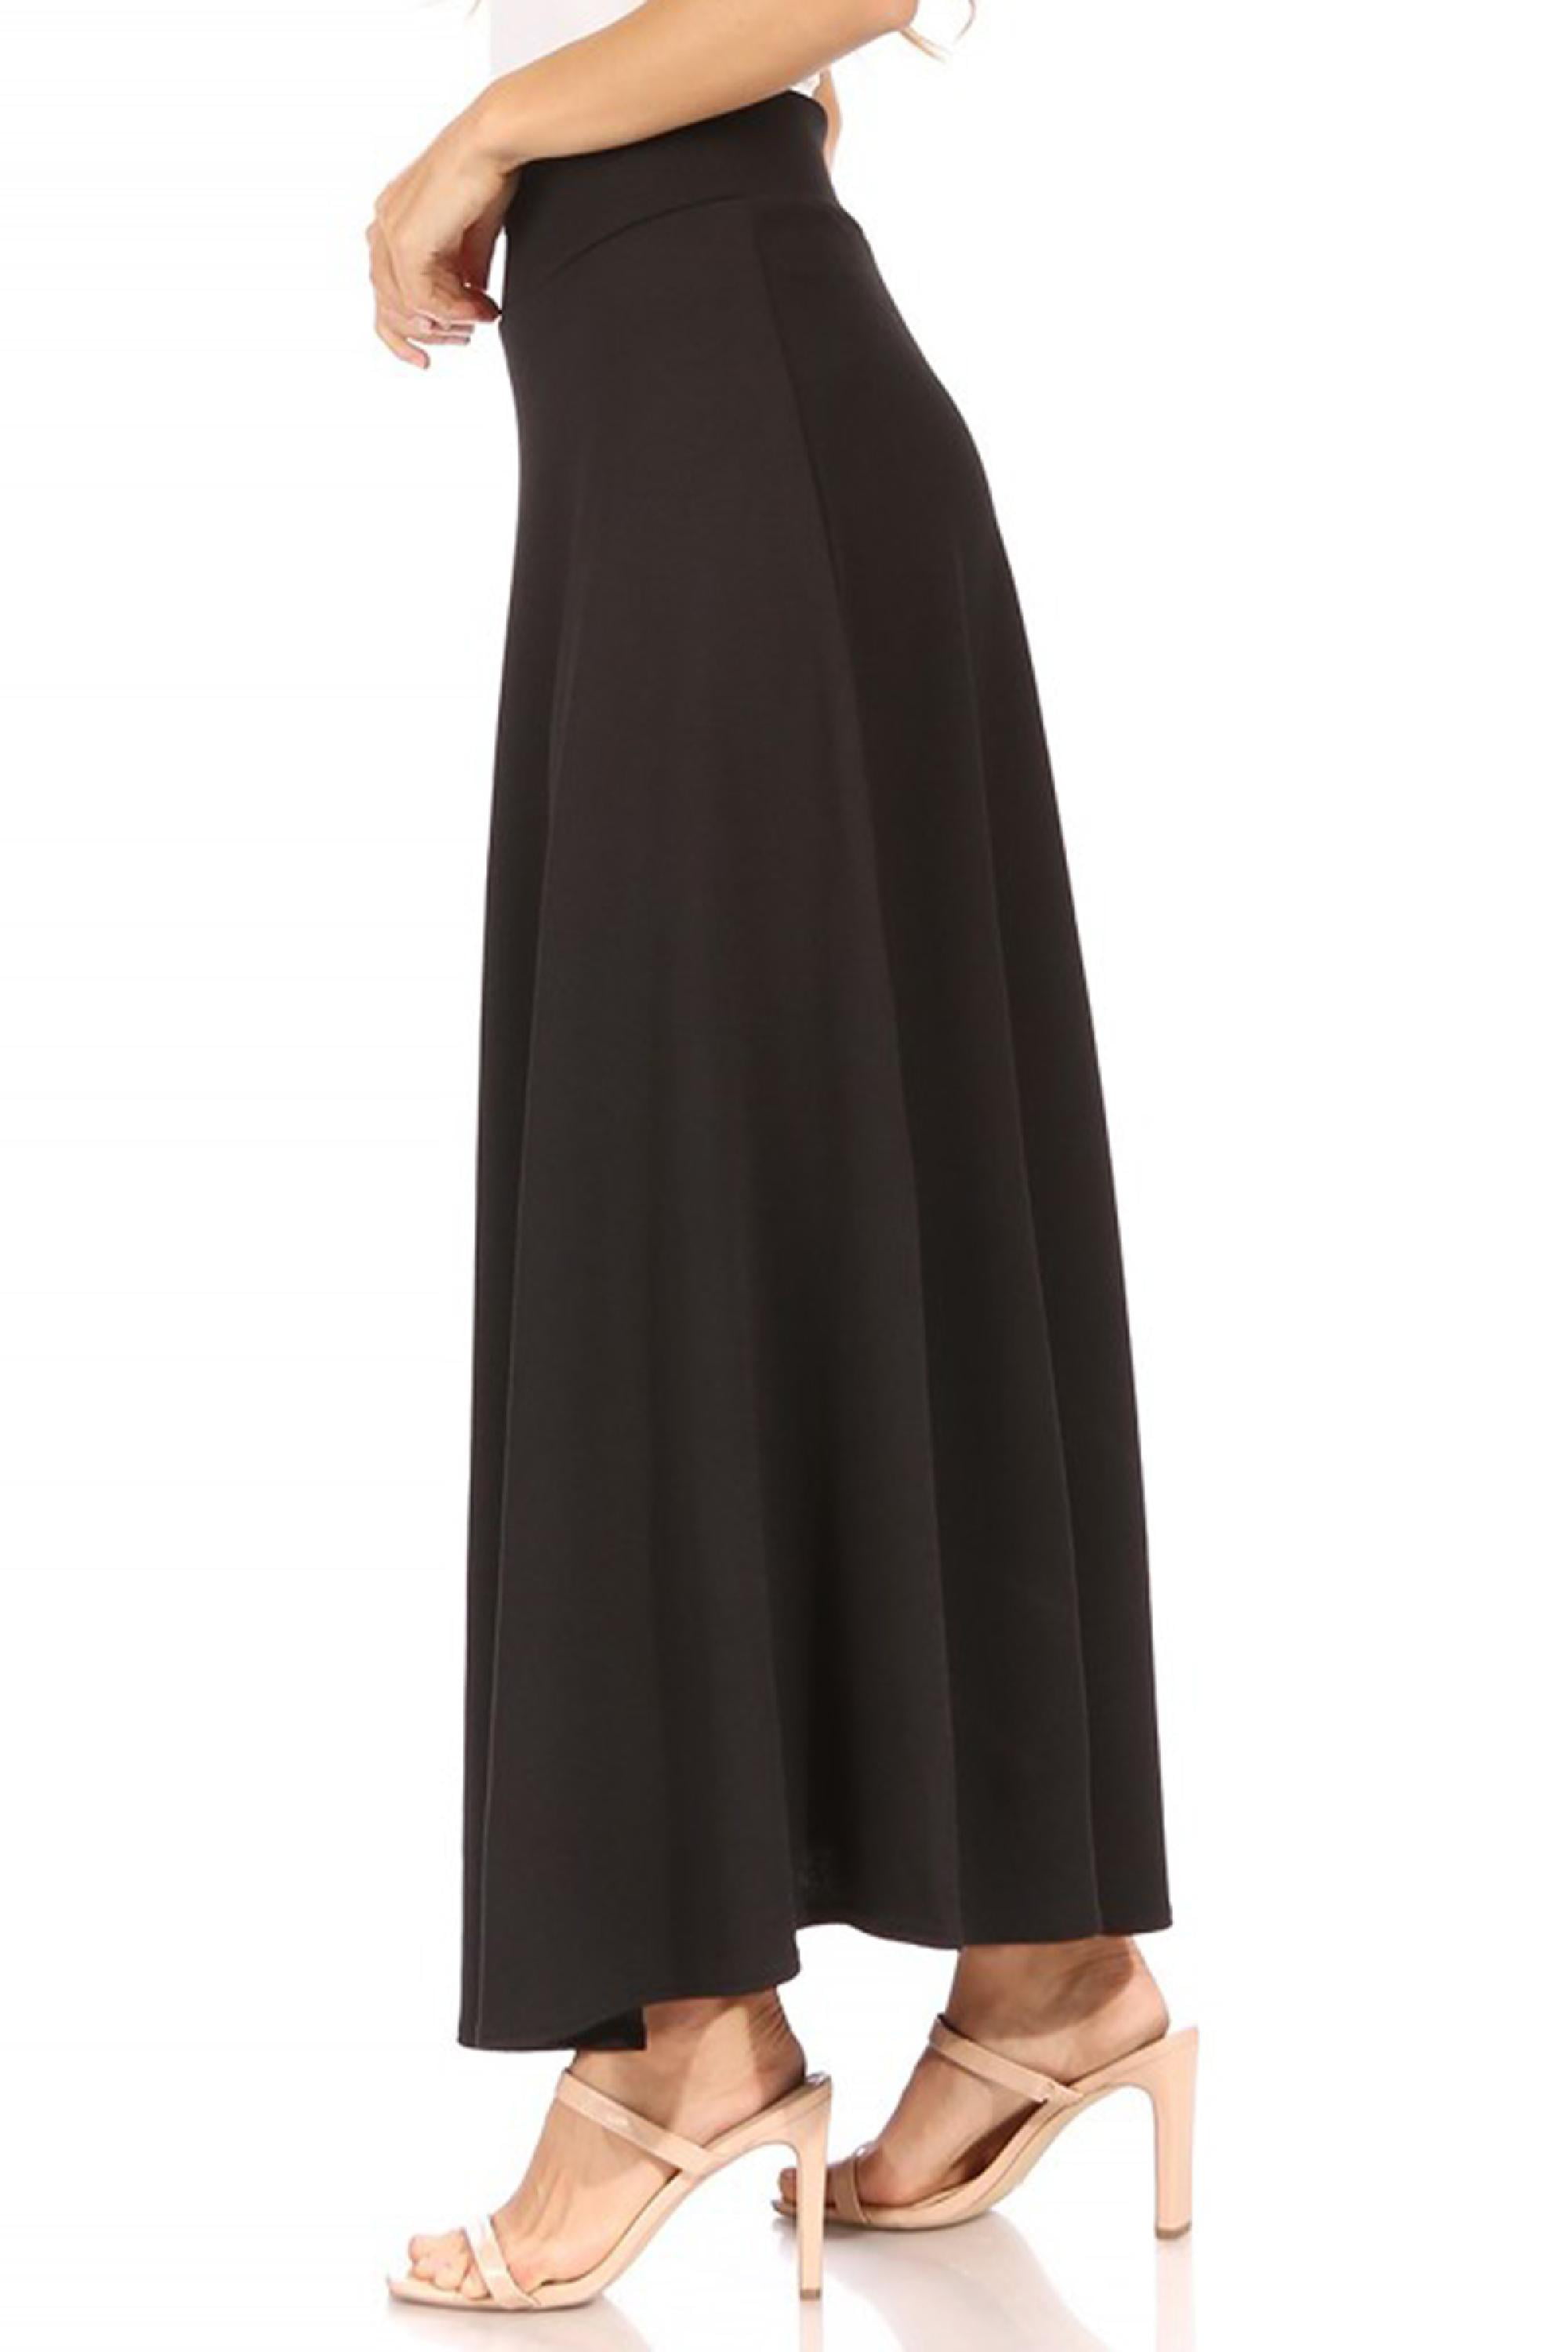  SuperPrity Flare Maxi Skirts for Women High Waisted